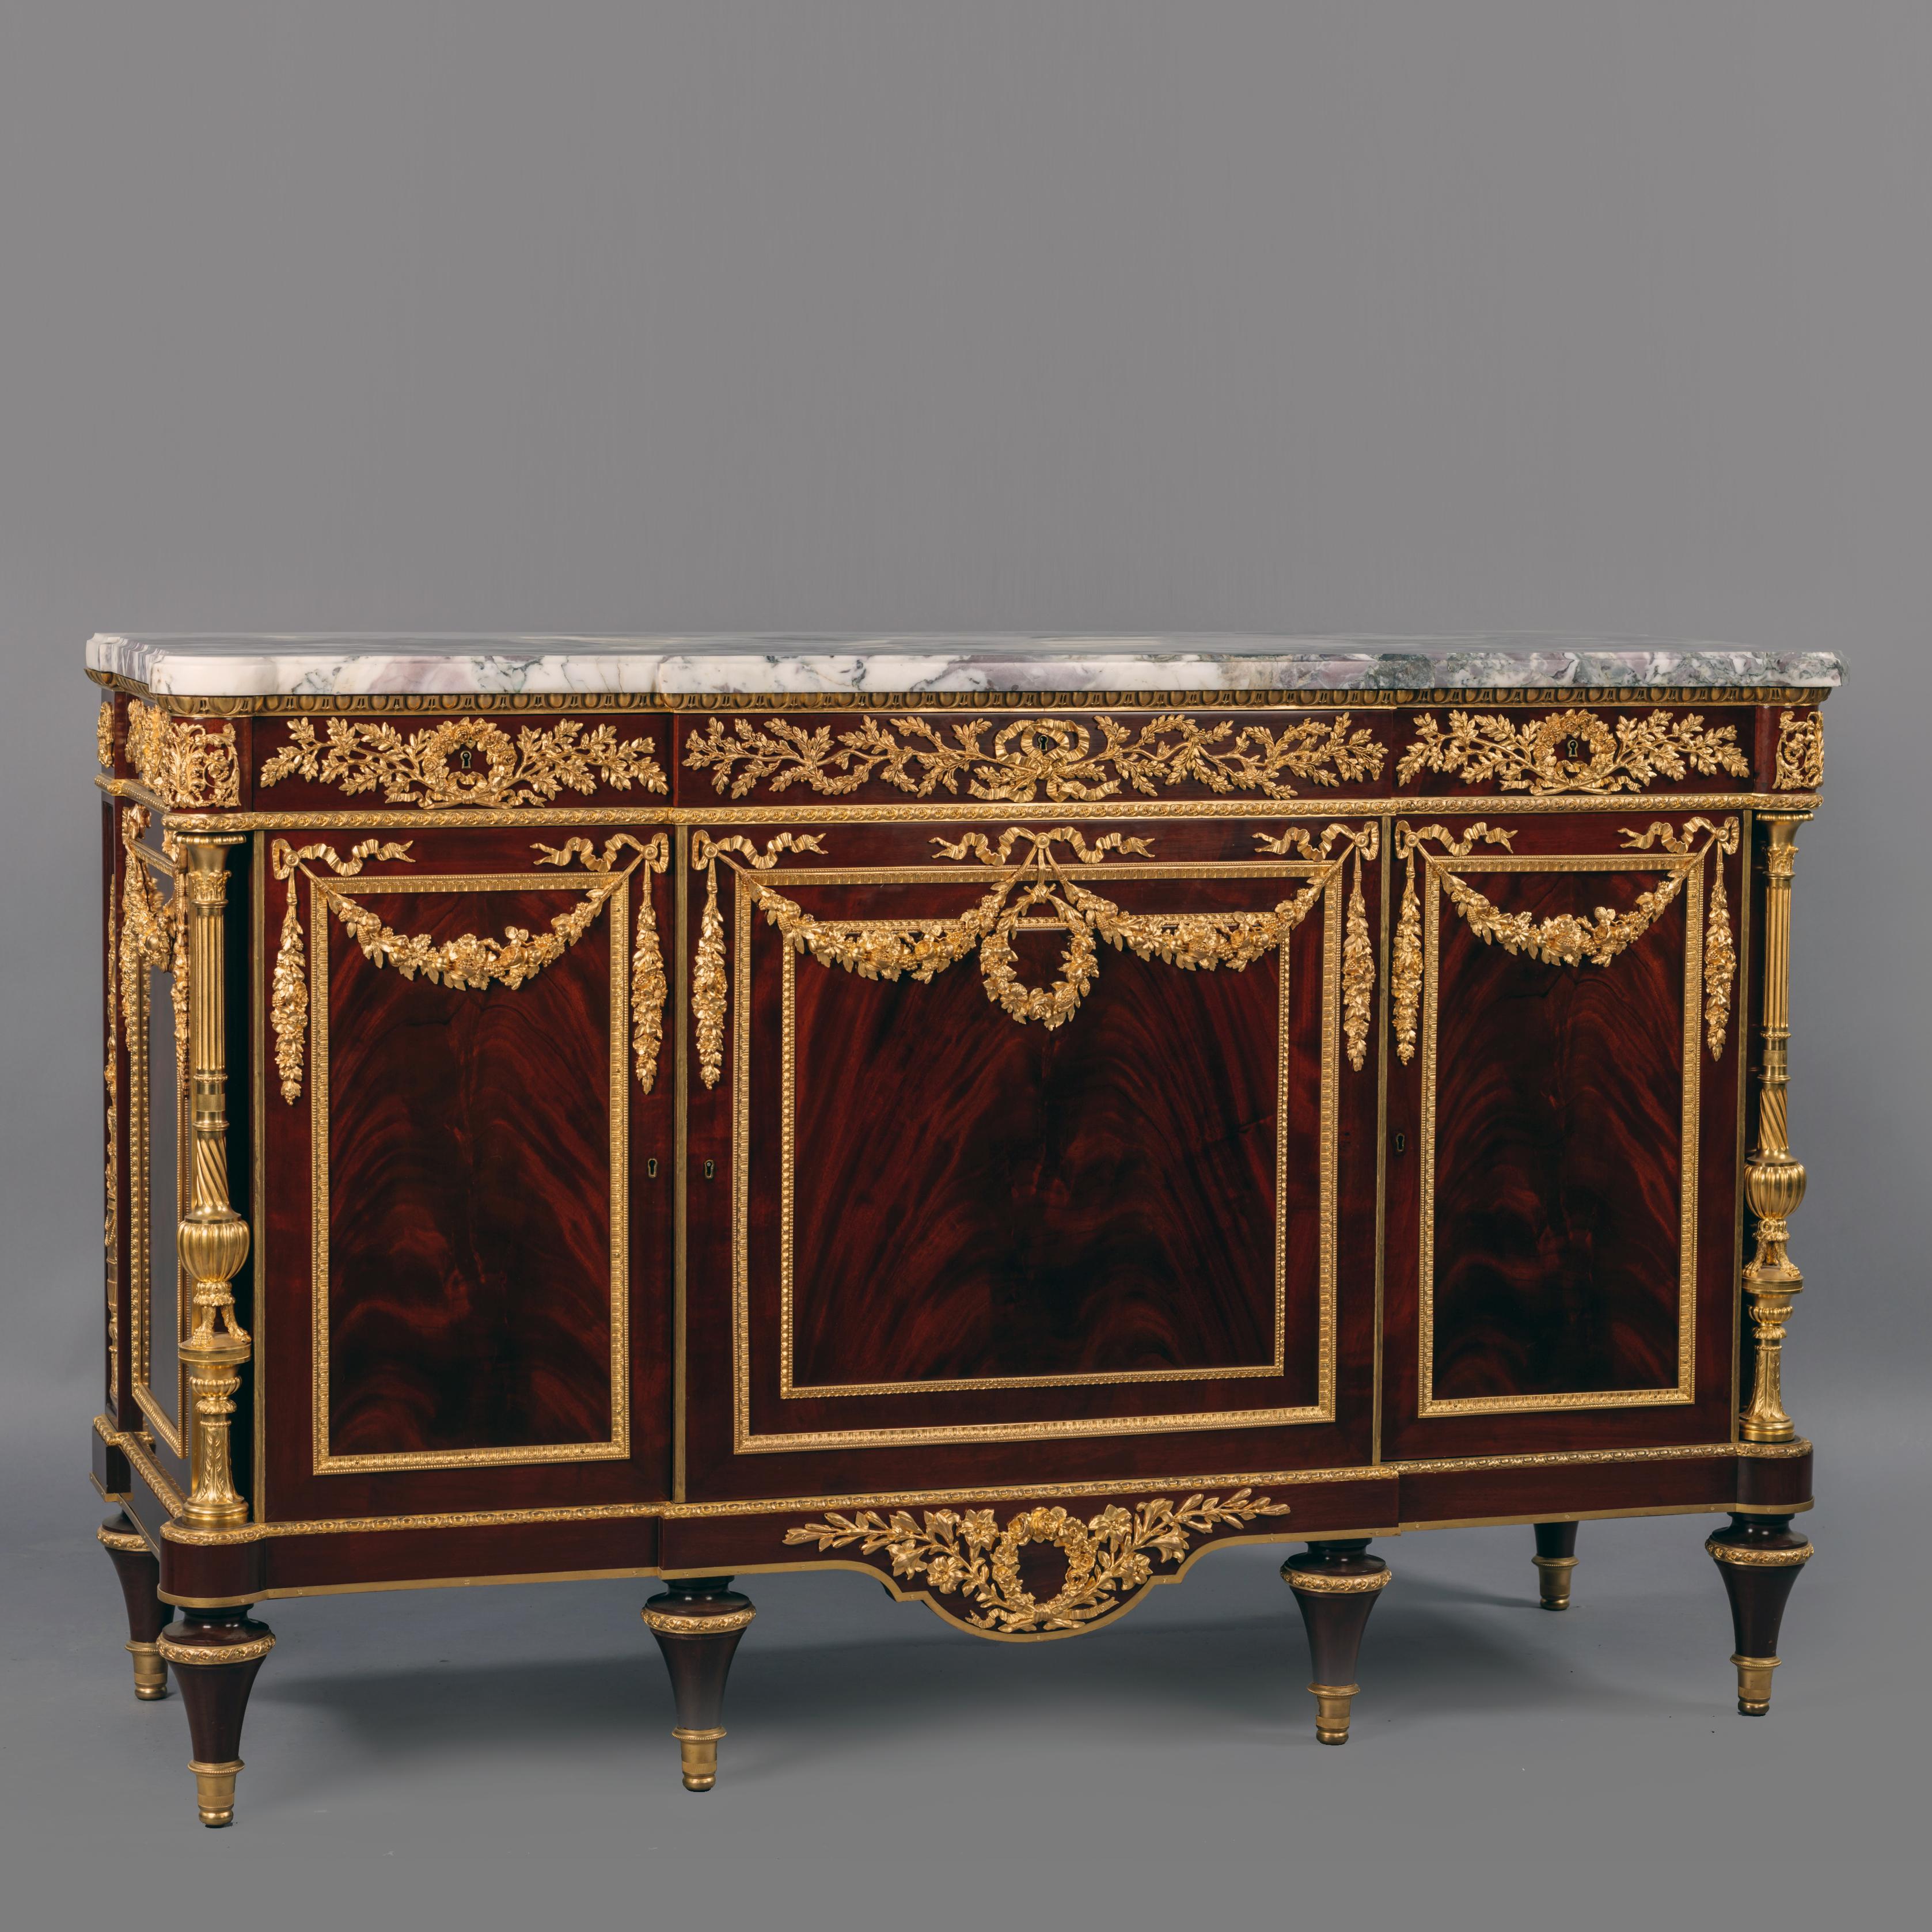 A fine Louis XVI style gilt bronze mounted mahogany commode, in the manner of Martin Carlin, attributed to Henry Dasson.

The lockplate signed to the reverse 'Duvivier, Paris'. 

The design for this elegant commode is taken from the celebrated